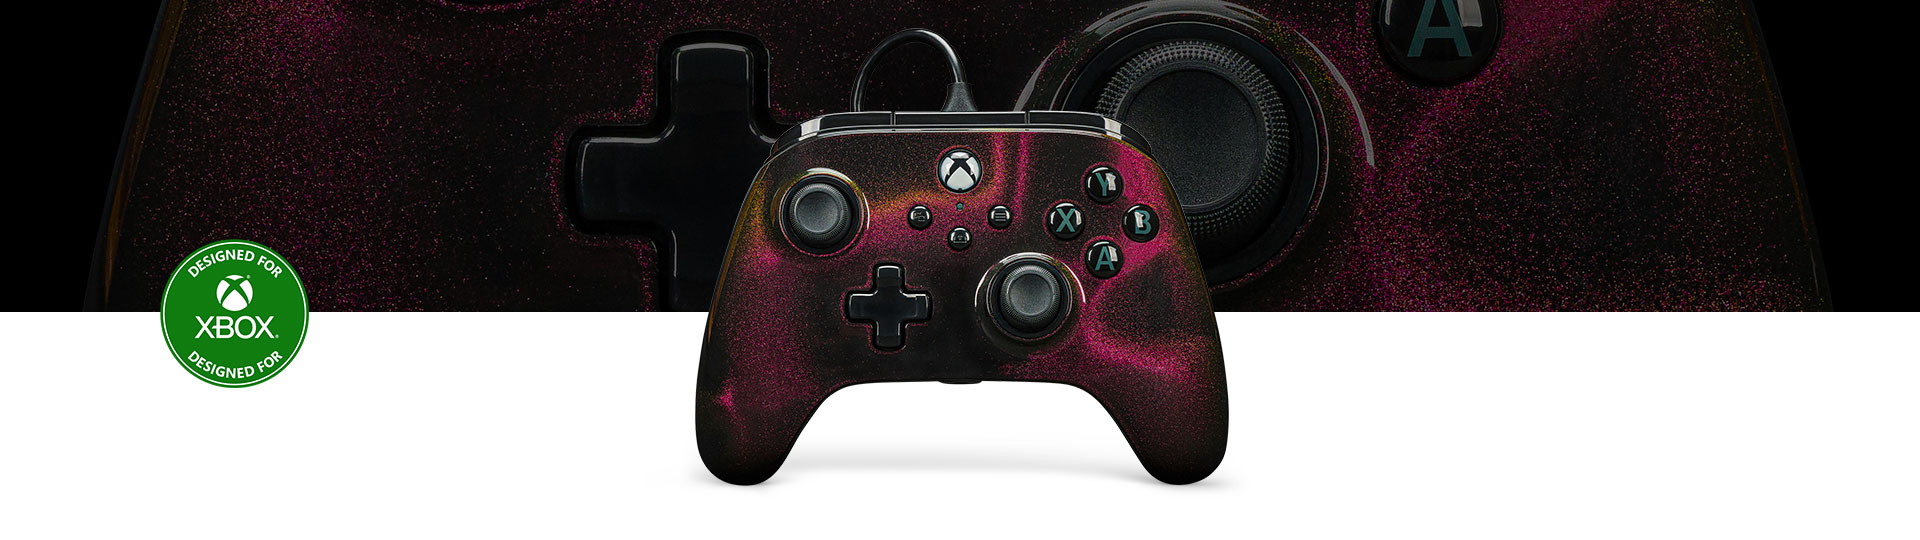 Front view of PowerA Advantage Wired Controller for Xbox Series X|S - Sparkle with close-up view in the background with Designed for Xbox badge